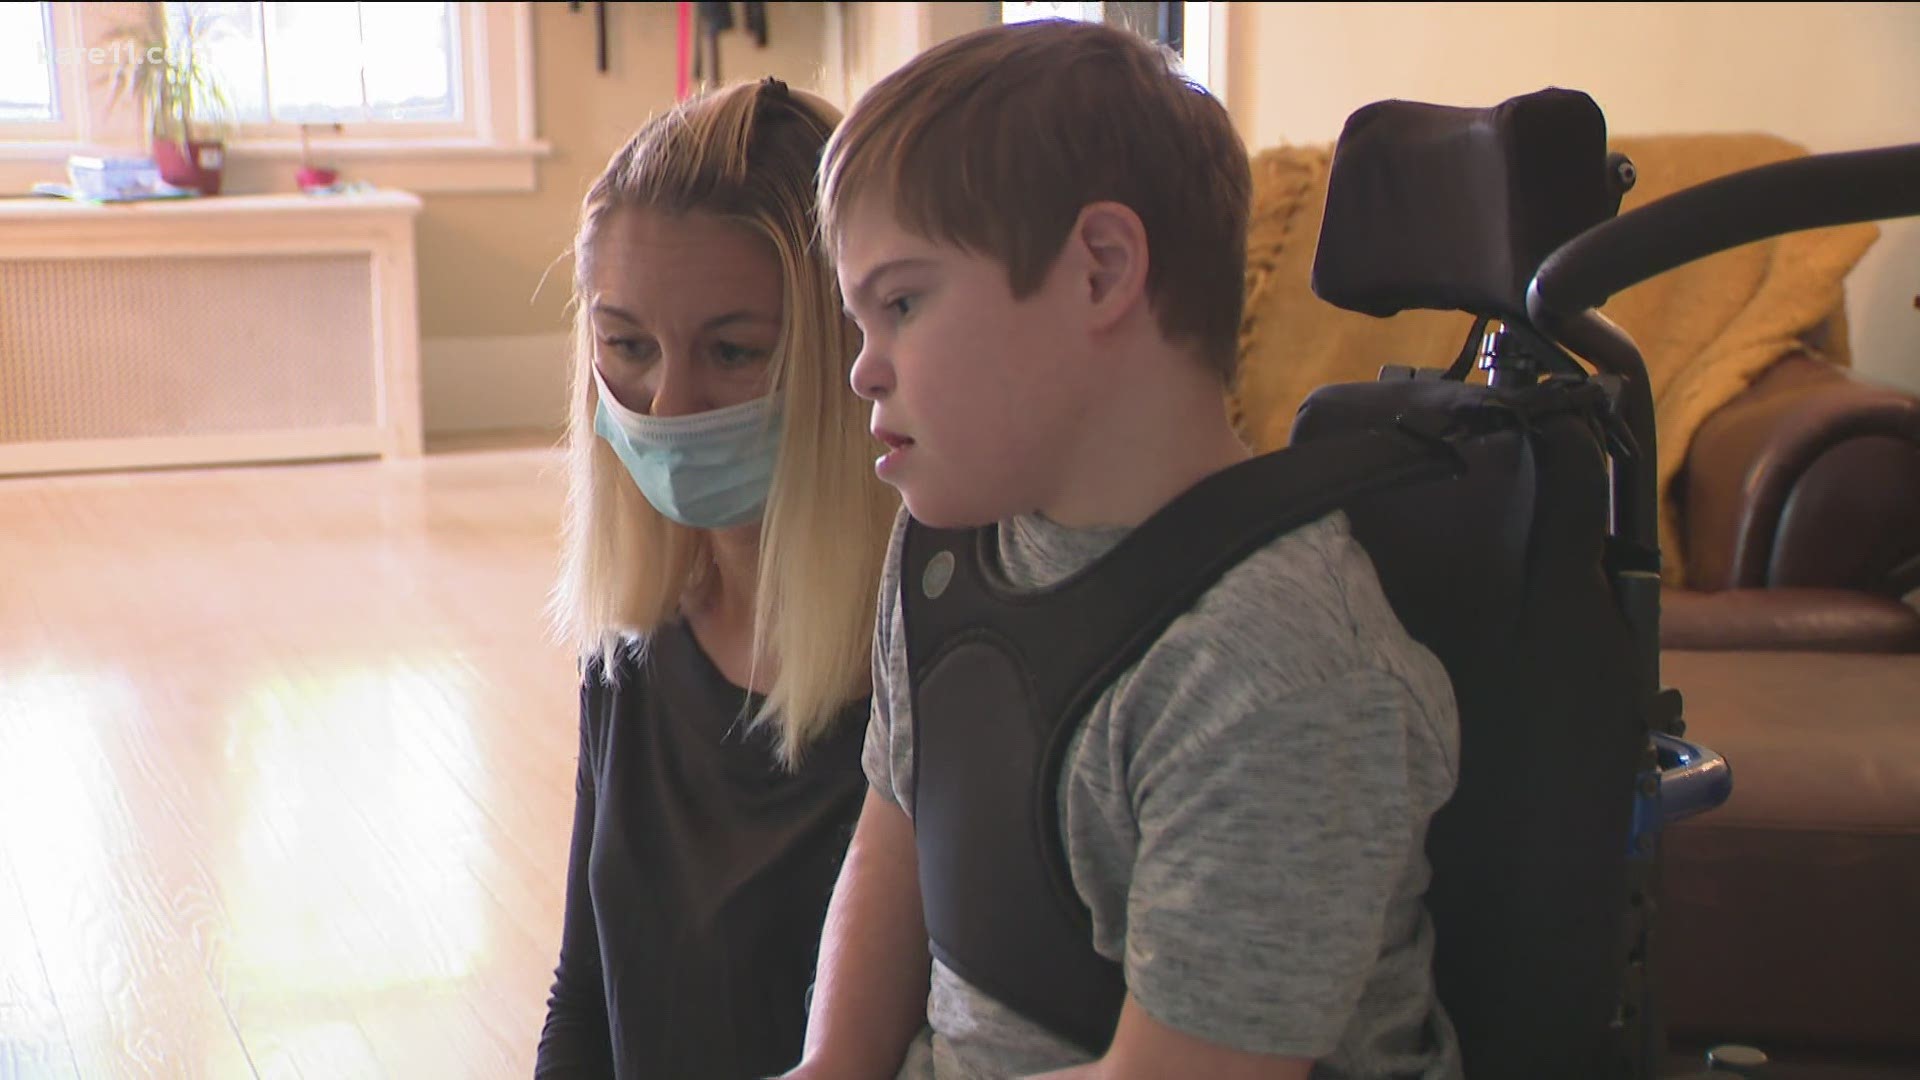 Parents of children with severe special needs say distance learning leaves their kids behind. After a KARE 11 investigation, education officials have made changes.